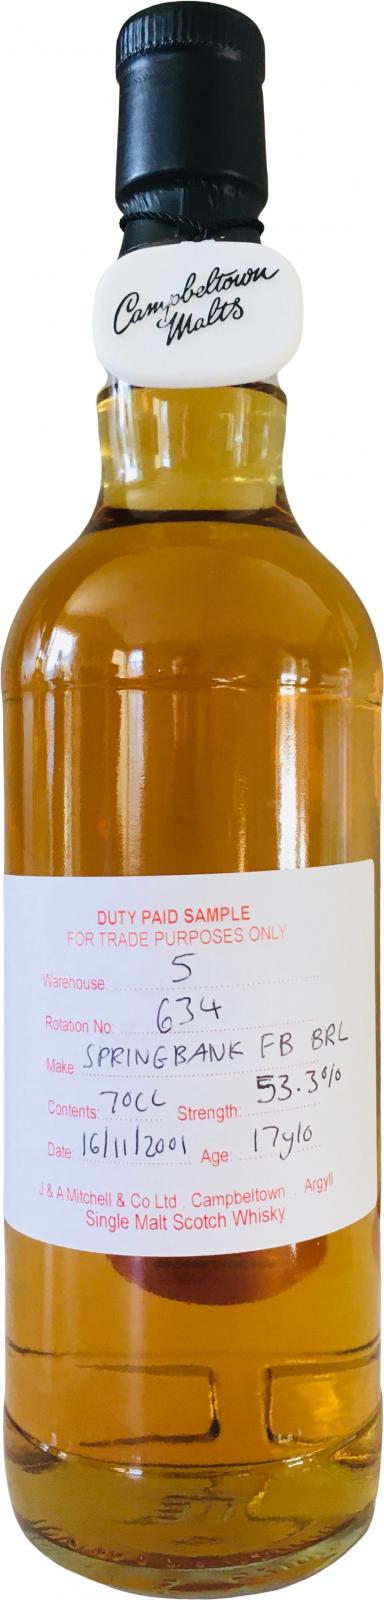 Springbank 2001 Duty Paid Sample For Trade Purposes Only Fresh Bourbon Barrel Rotation 634 53.3% 700ml